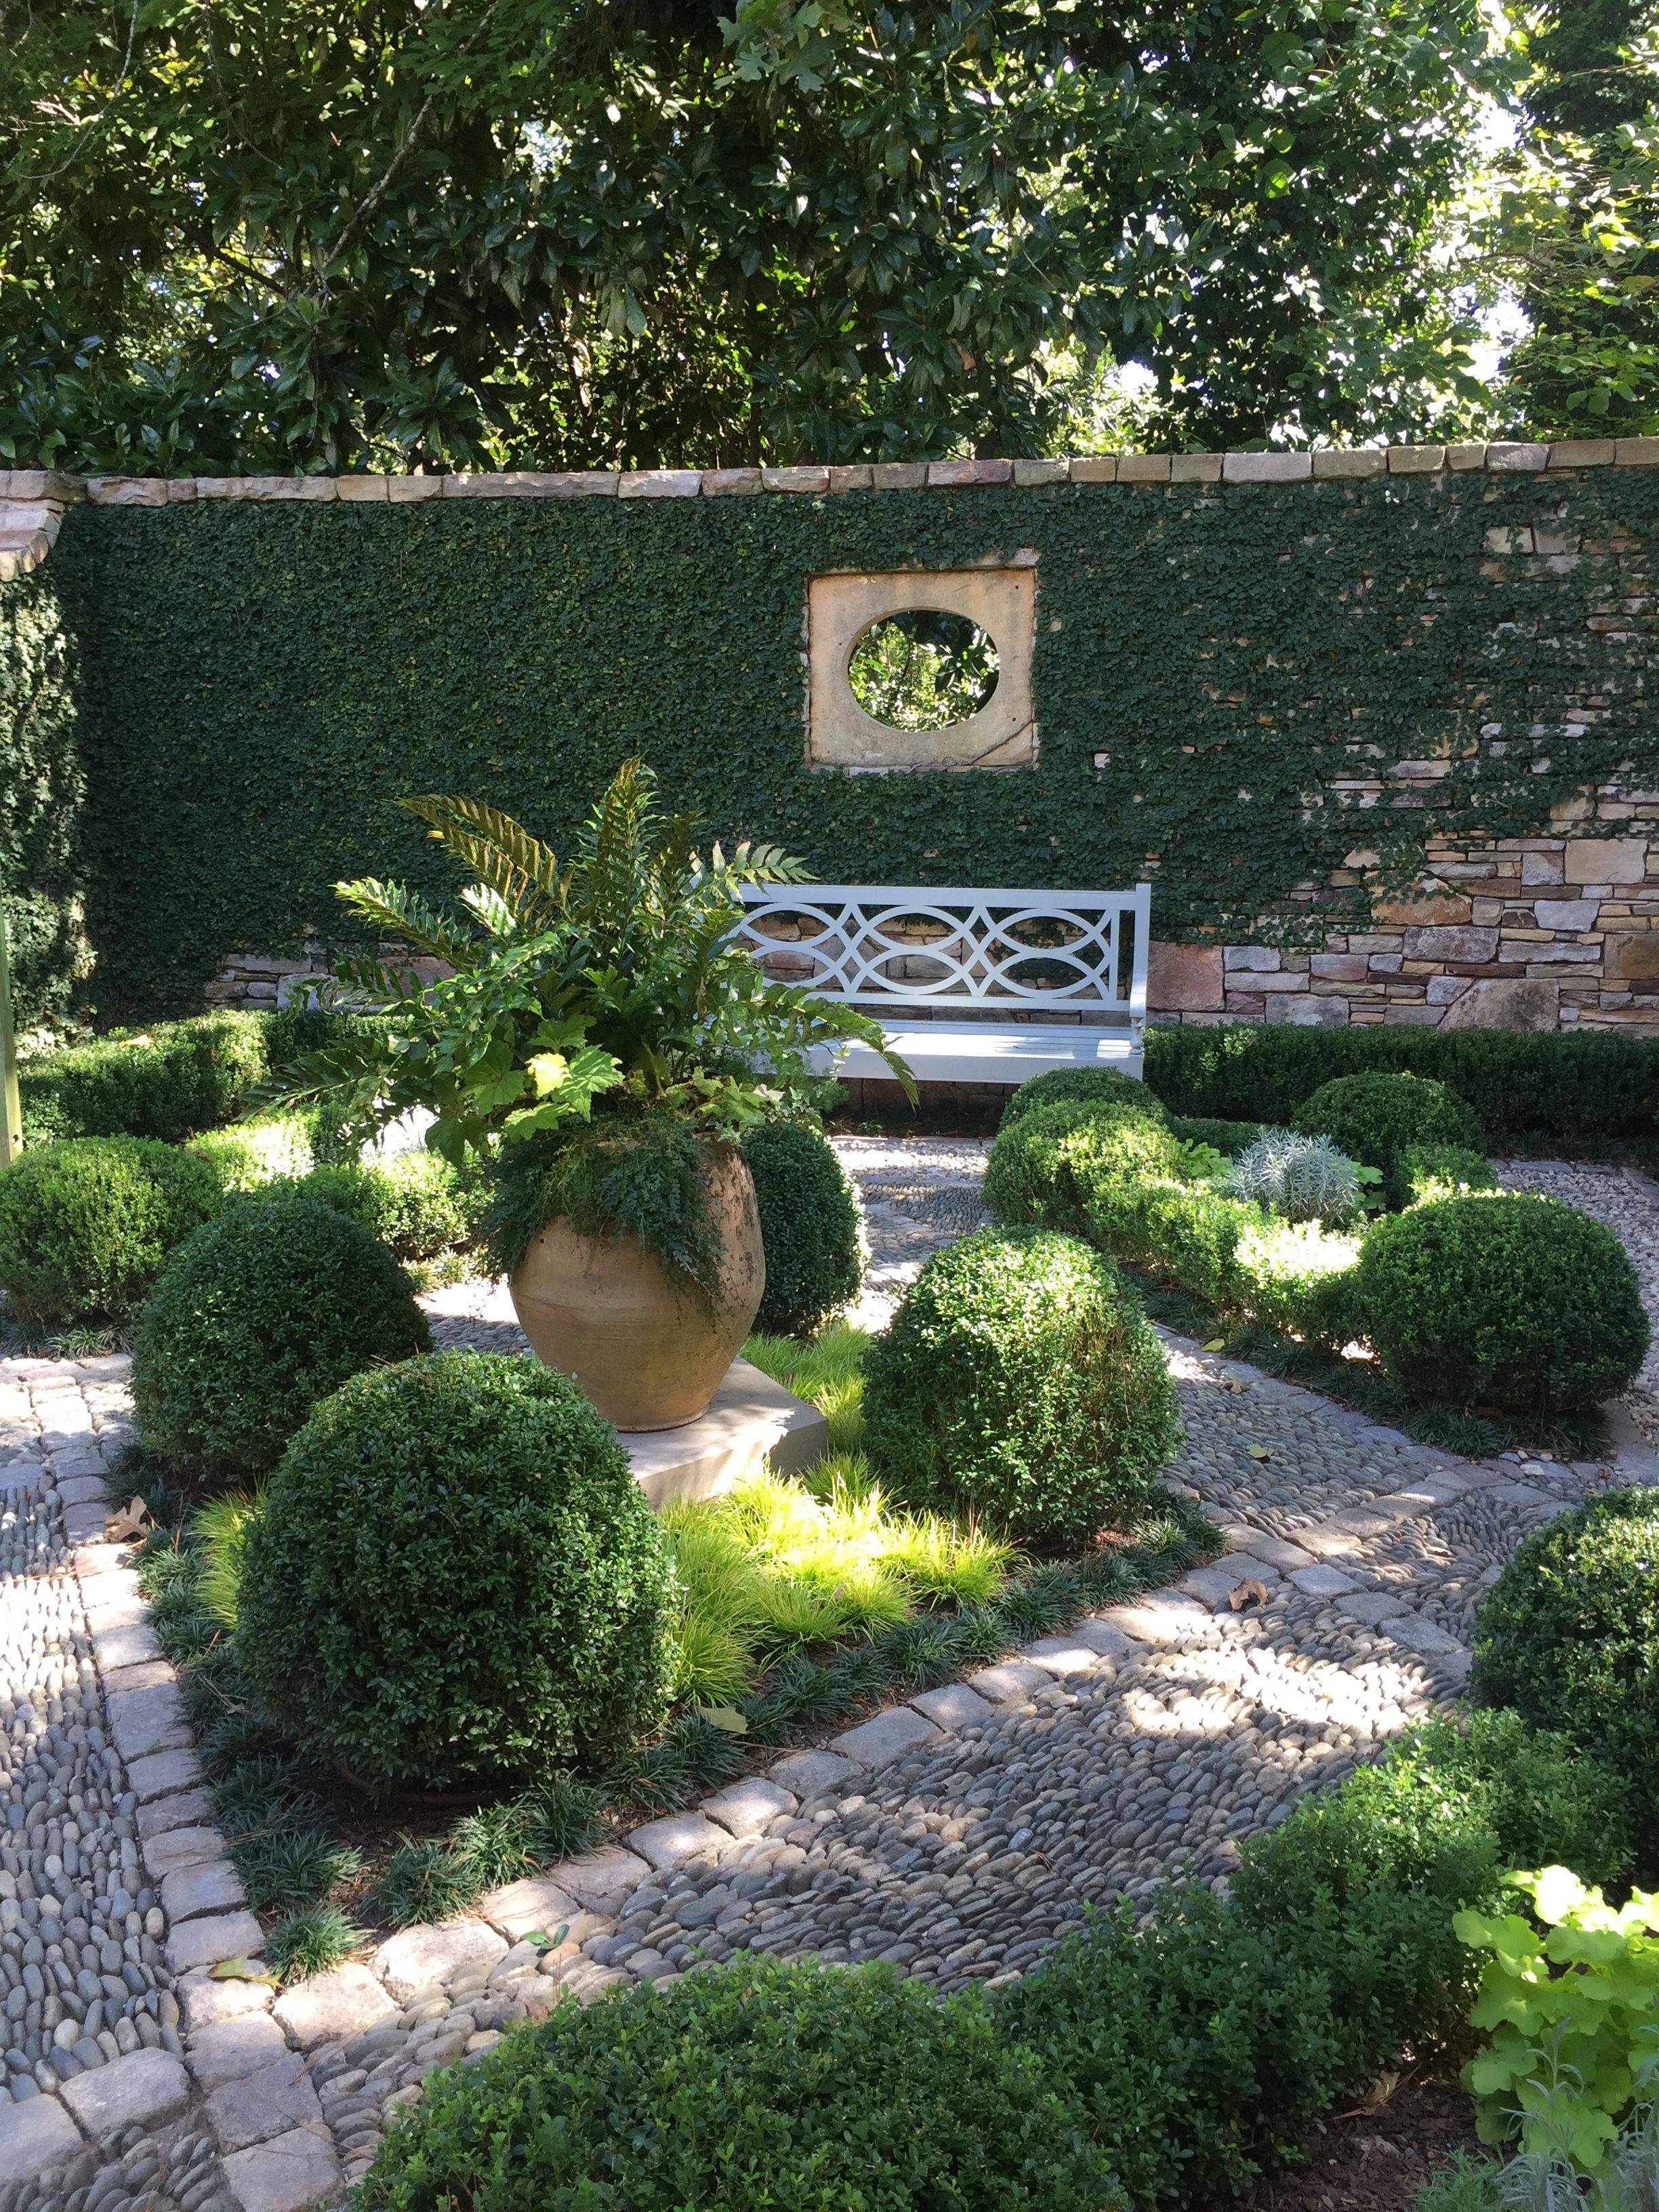 Green And White Formal Garden